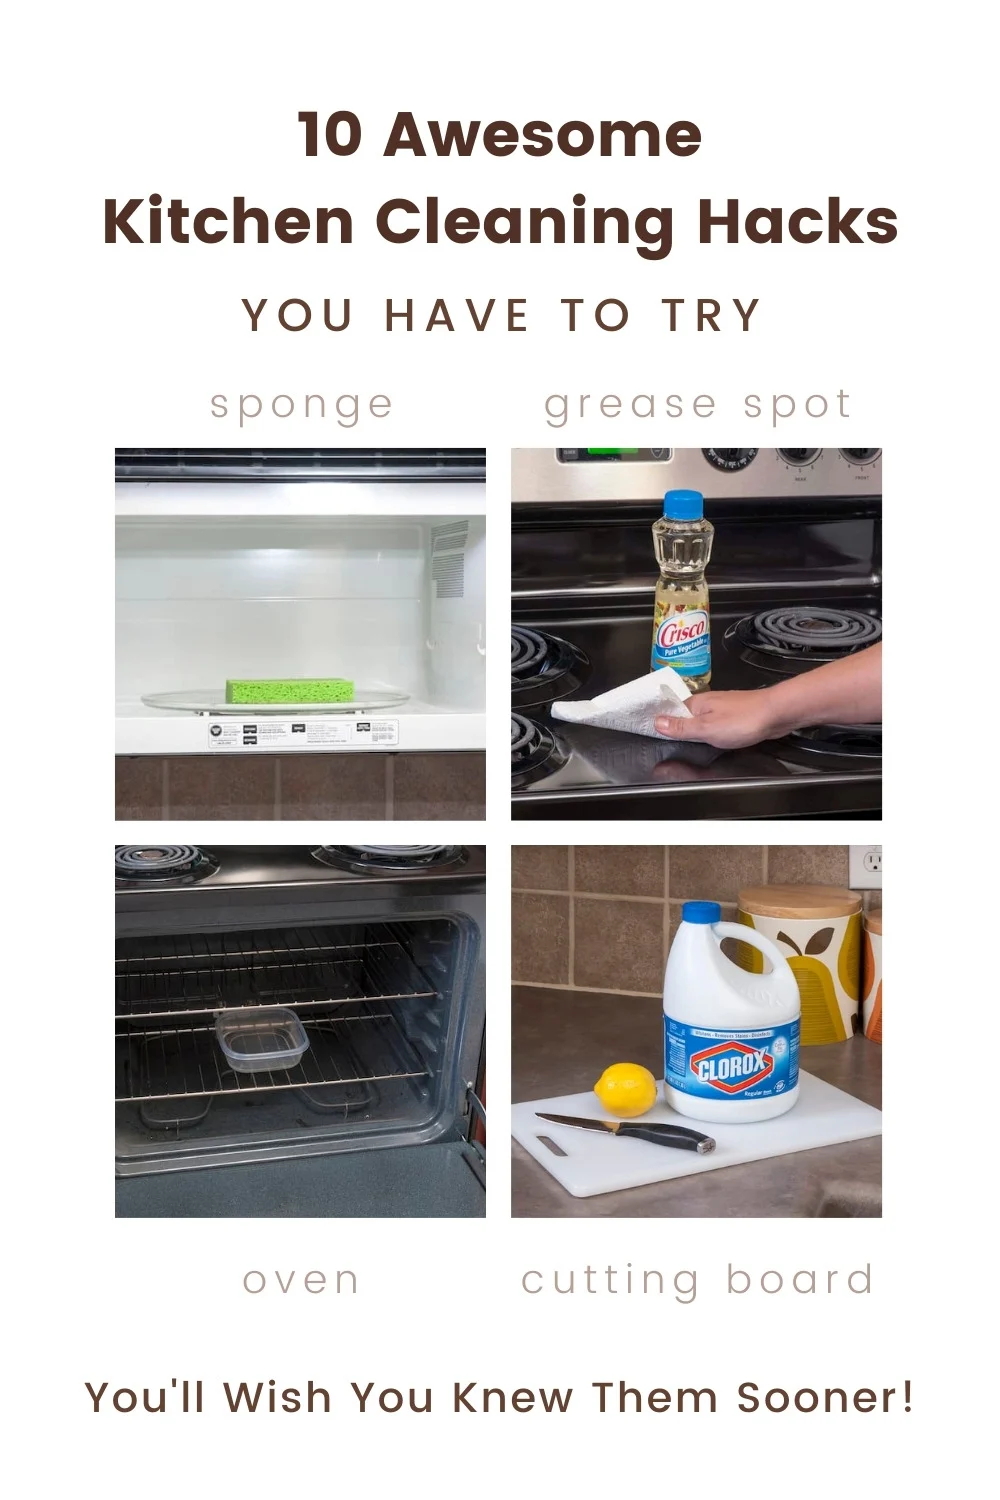 7 brilliant hacks to clean your microwave oven in no time!